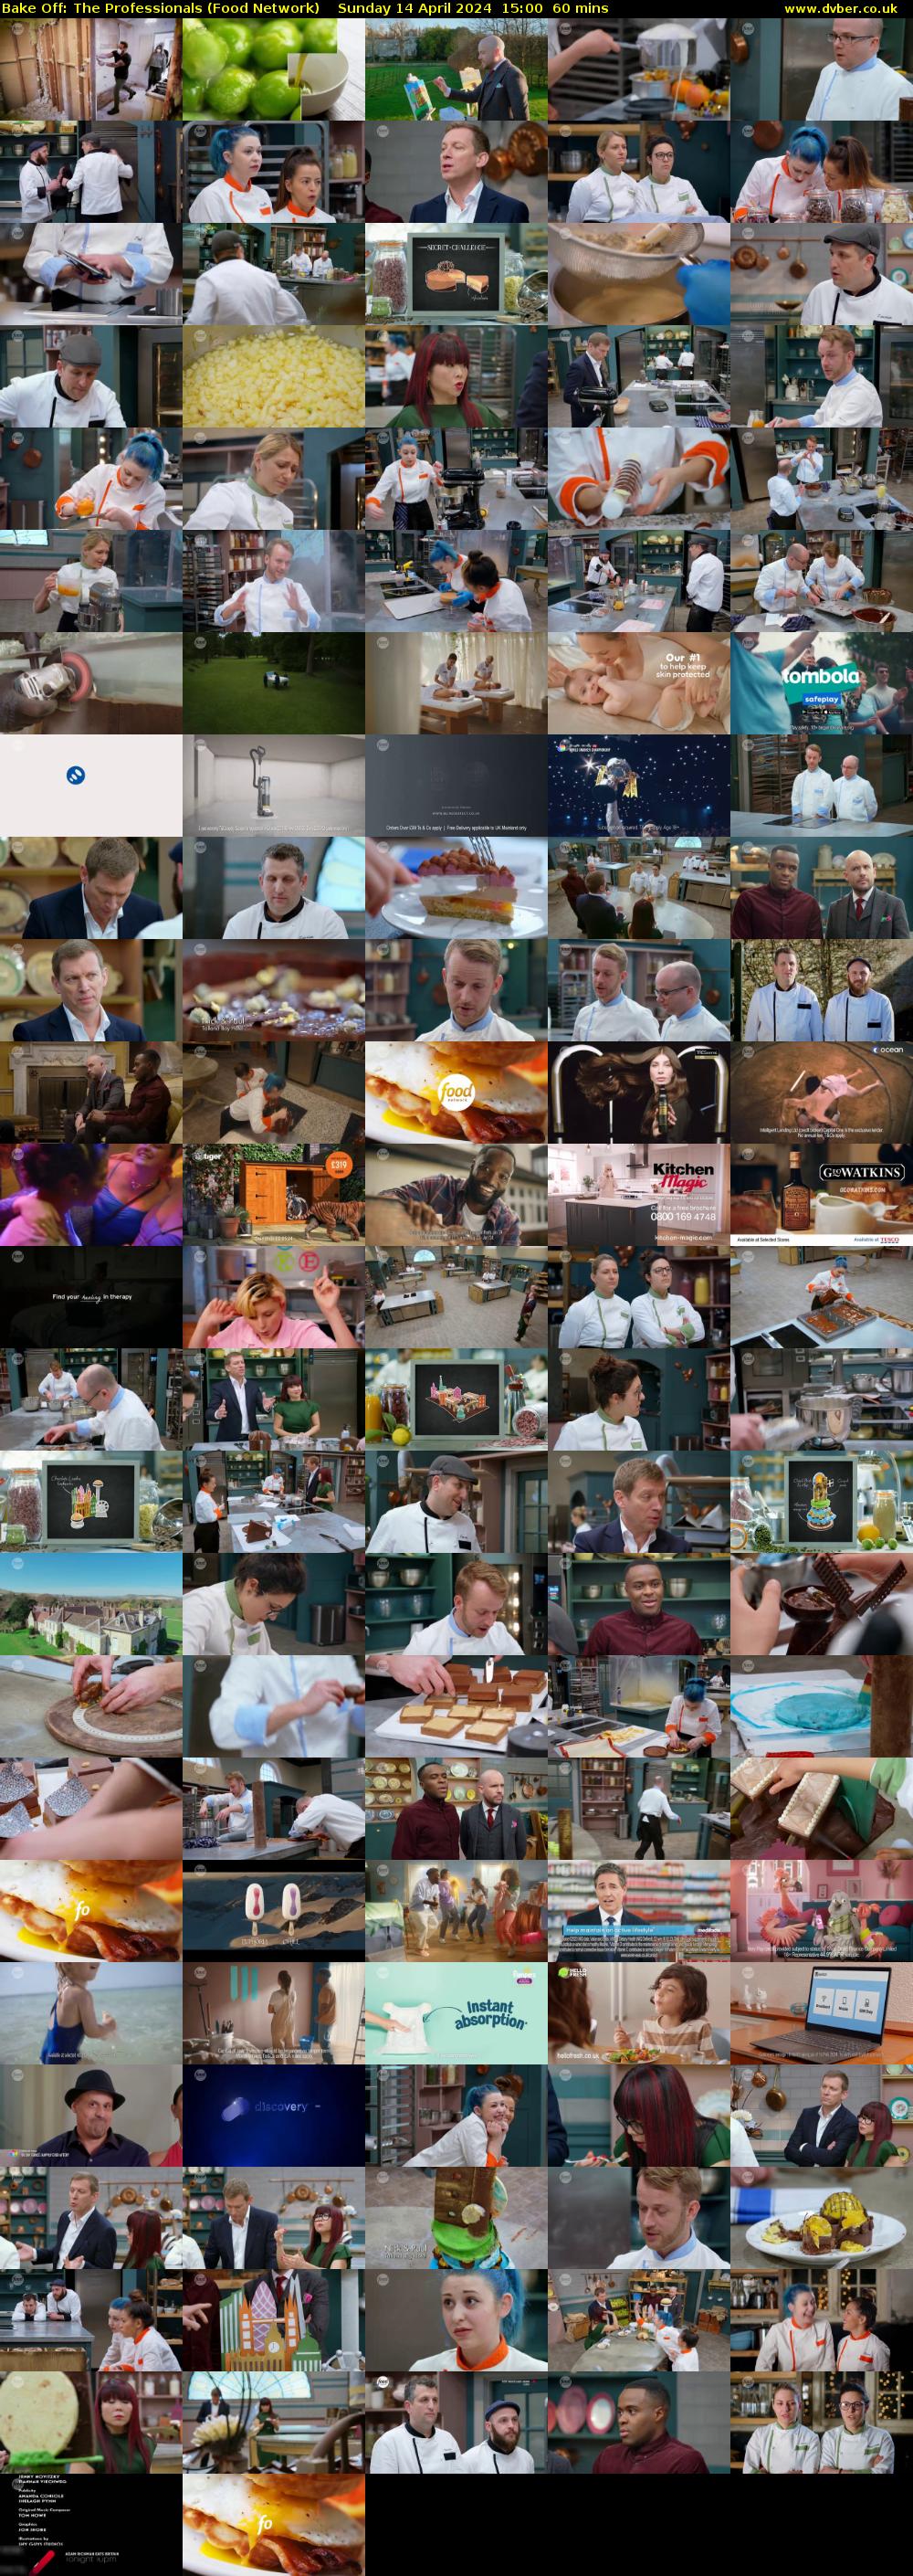 Bake Off: The Professionals (Food Network) Sunday 14 April 2024 15:00 - 16:00